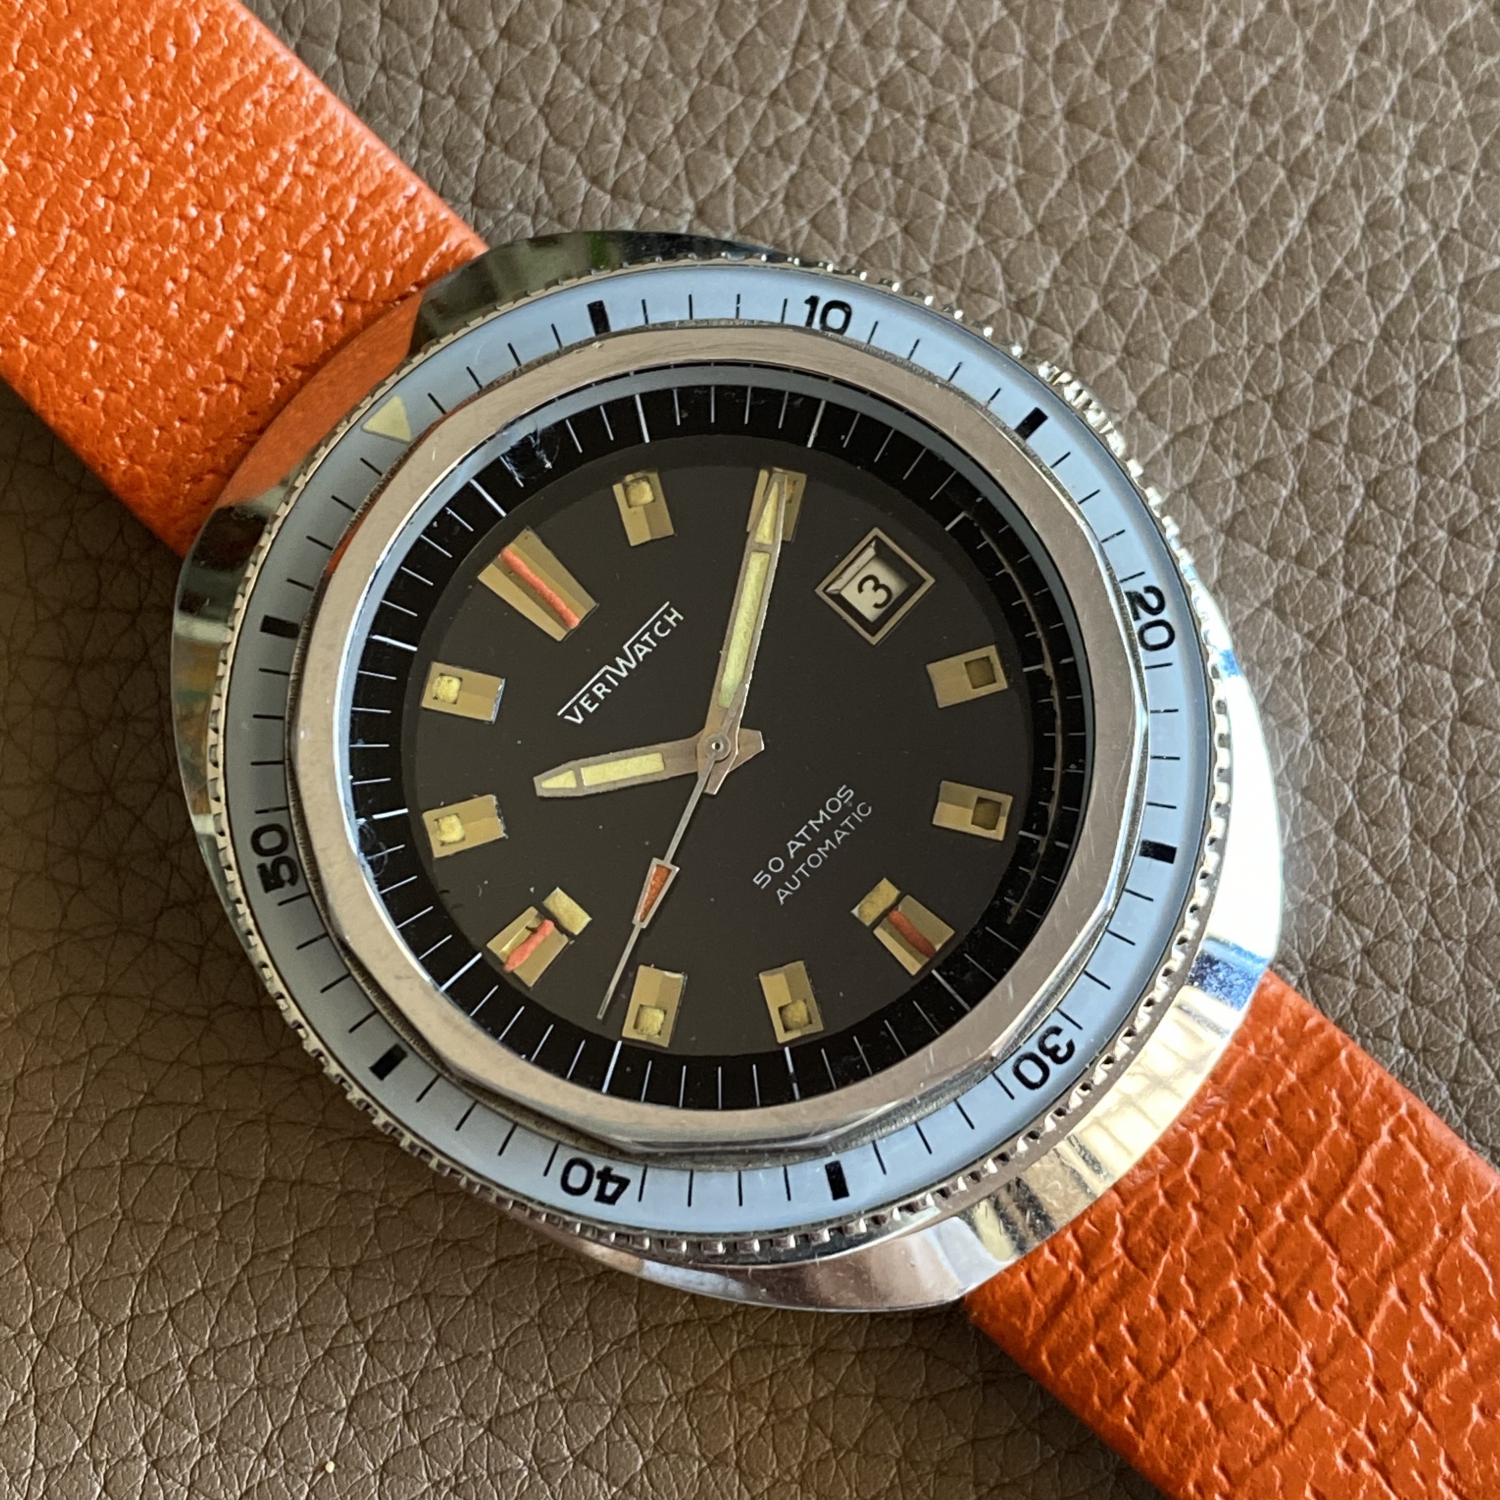 Vintage Watches and Cars - VWCWEB.COM